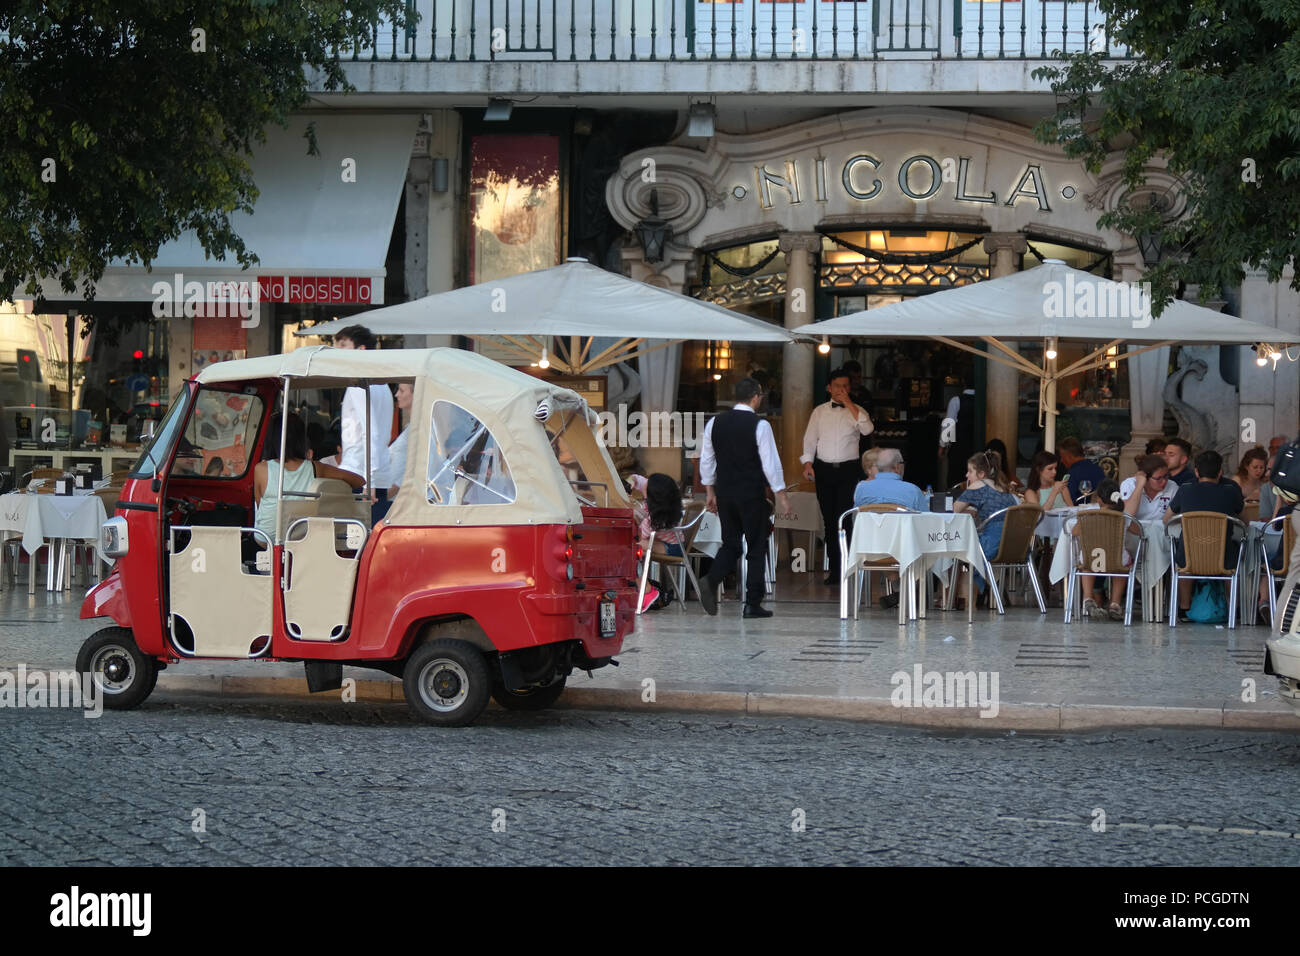 Lisbon. Café Nicolá, one of Lisbon’s oldest and most famous restaurants and cafes. Rossio square. Stock Photo